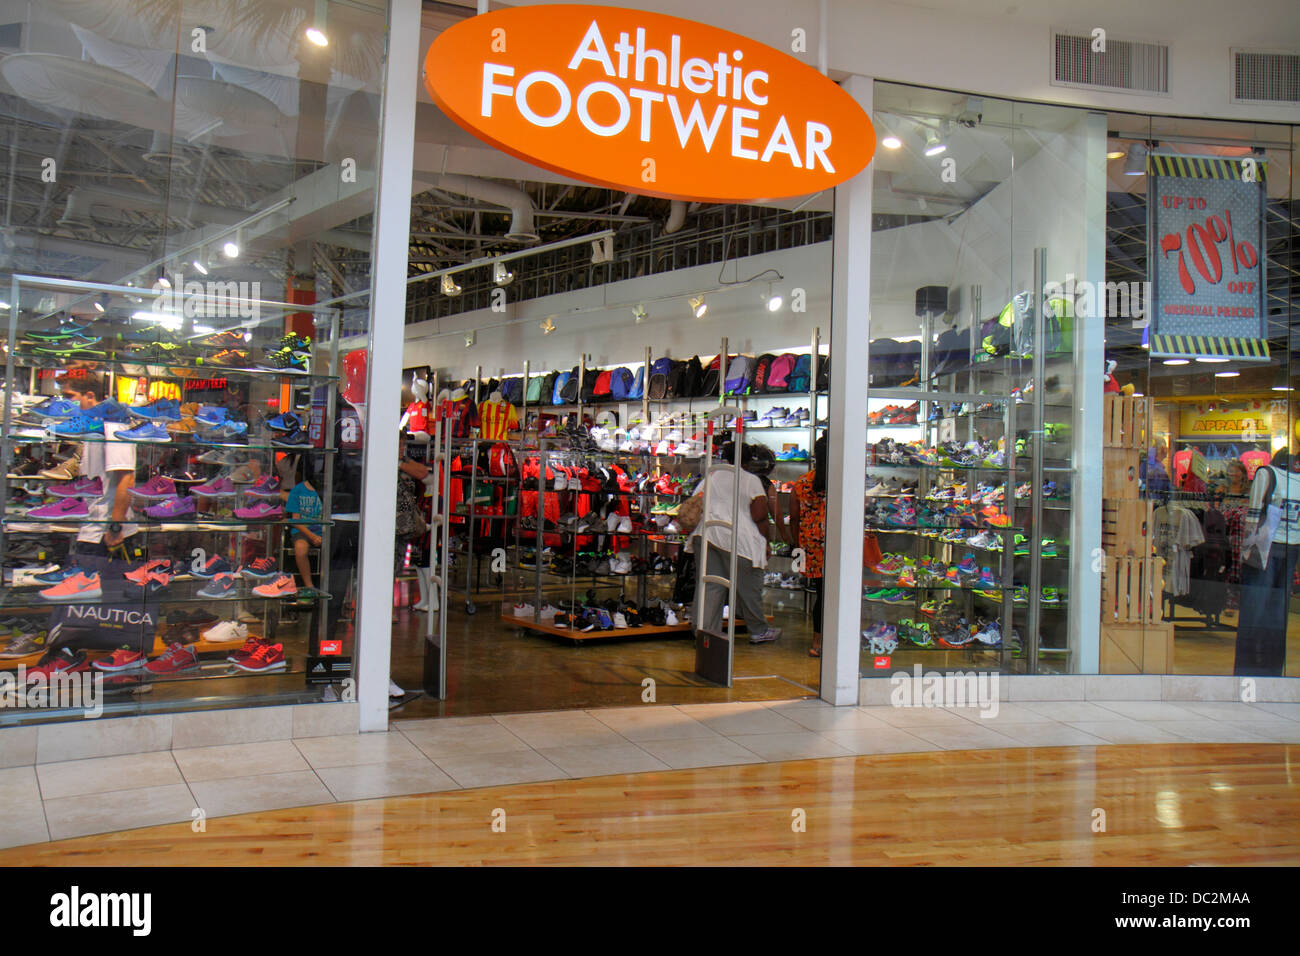 Florida Sunrise,Fort Ft. Lauderdale,Sawgrass Mills mall,sale,display sale front,entrance,Athletic Footwear,shoe store,looking FL130731119 Stock Photo